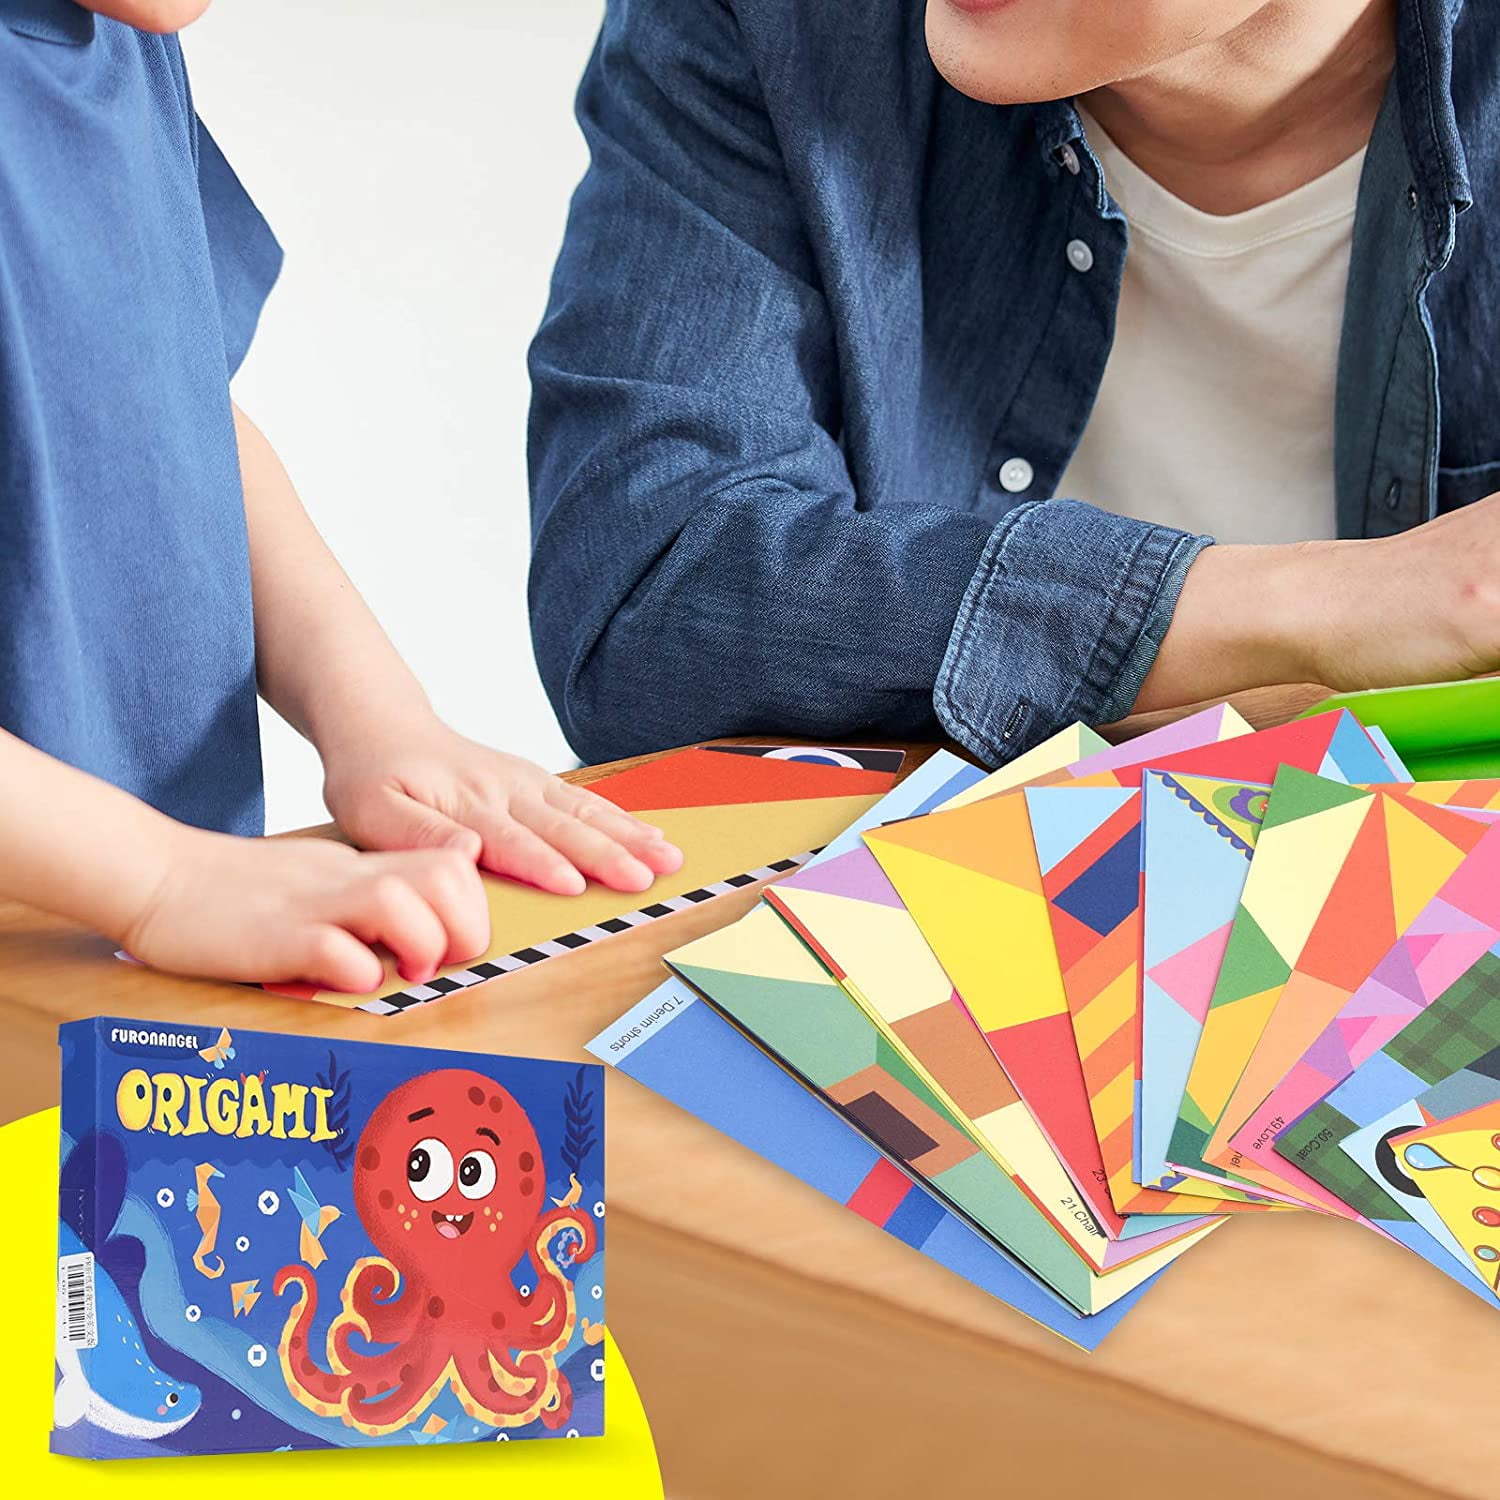 Lnkoo Colorful Origami Paper Kit Kids 152Sheets Double Sided Guiding Color Booklet Great Value Gift Box for Children Kids Ages 3+, Size: 8.66, Black